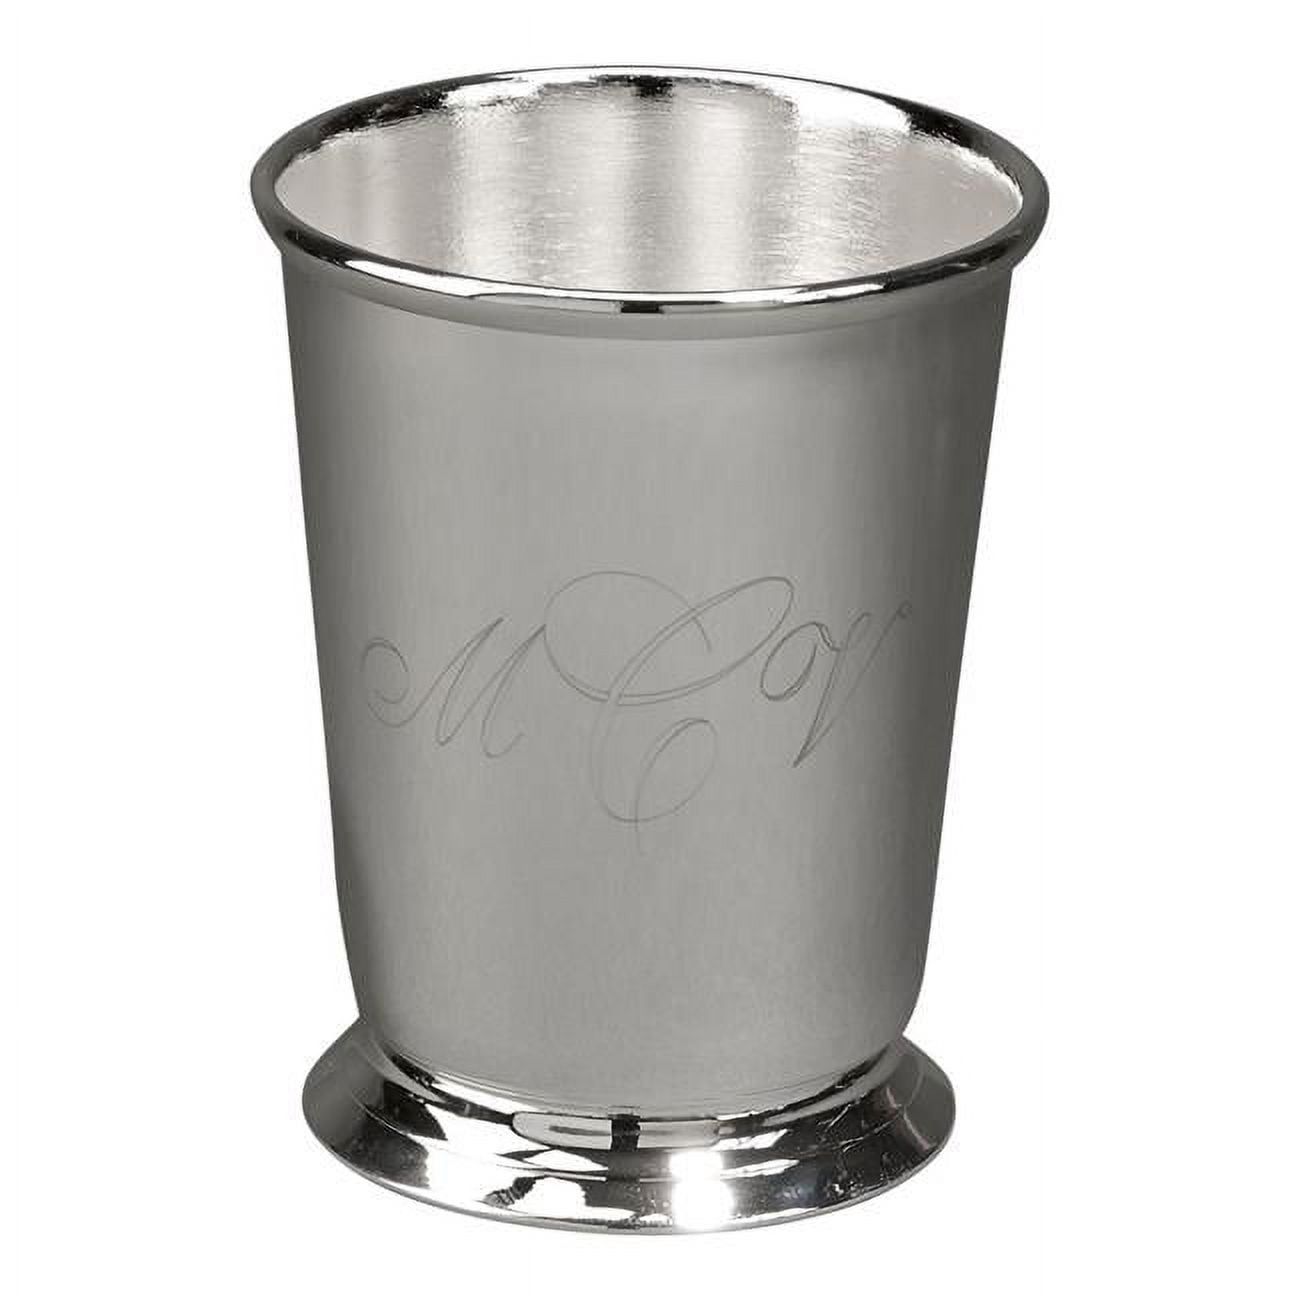 021072 11 Oz Silver Plated Mint Julep Cup With 4 In. Capacity - Green